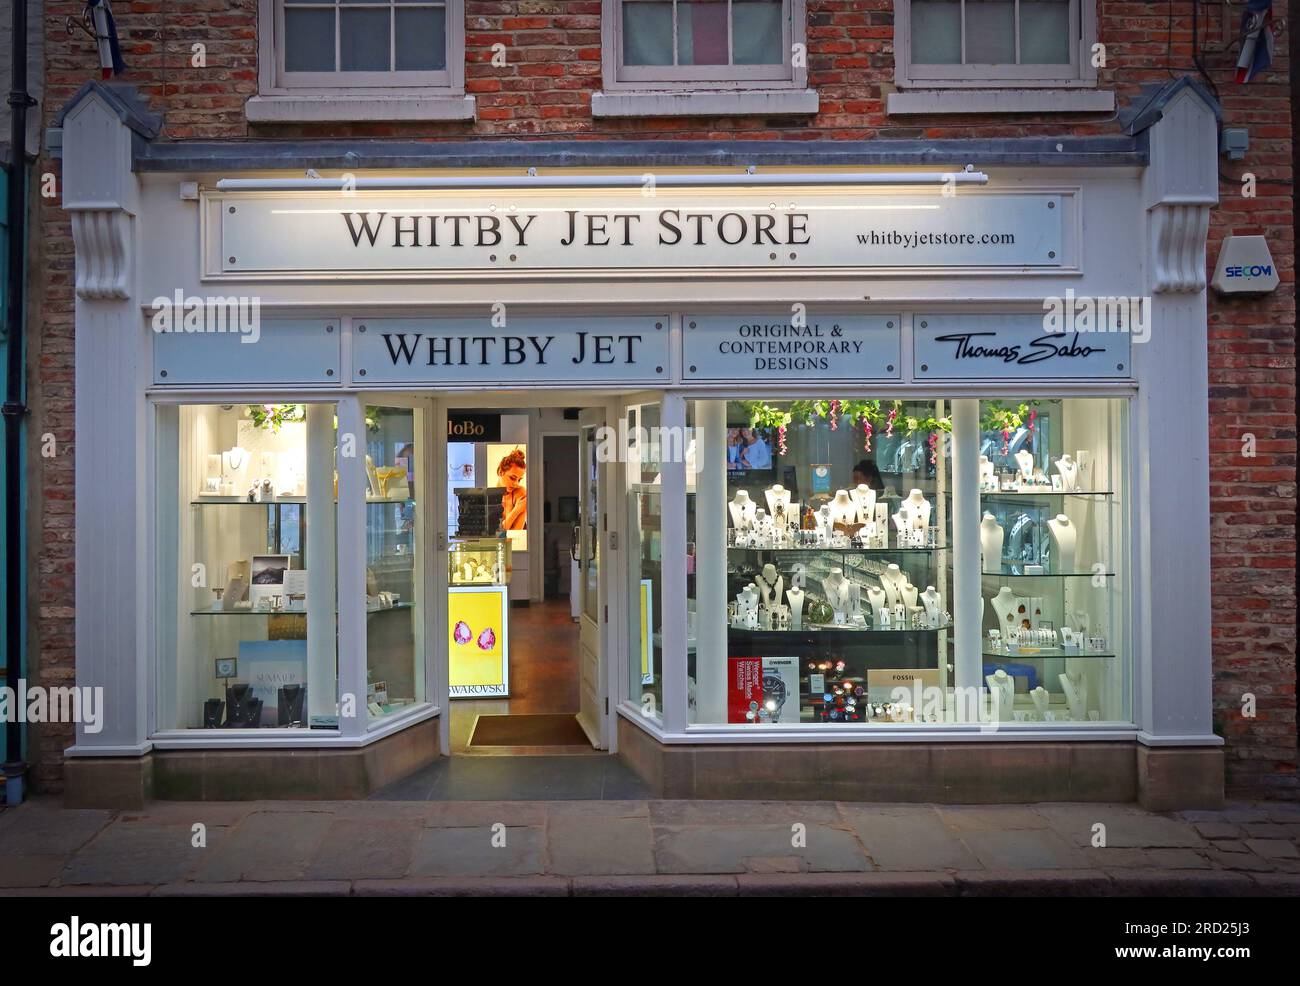 Whitby Tourist Shops, The Whitby Jet Store, 145 Church St, Whitby, North Yorkshire, Yorkshire, Inghilterra, REGNO UNITO, YO22 4DE Foto Stock